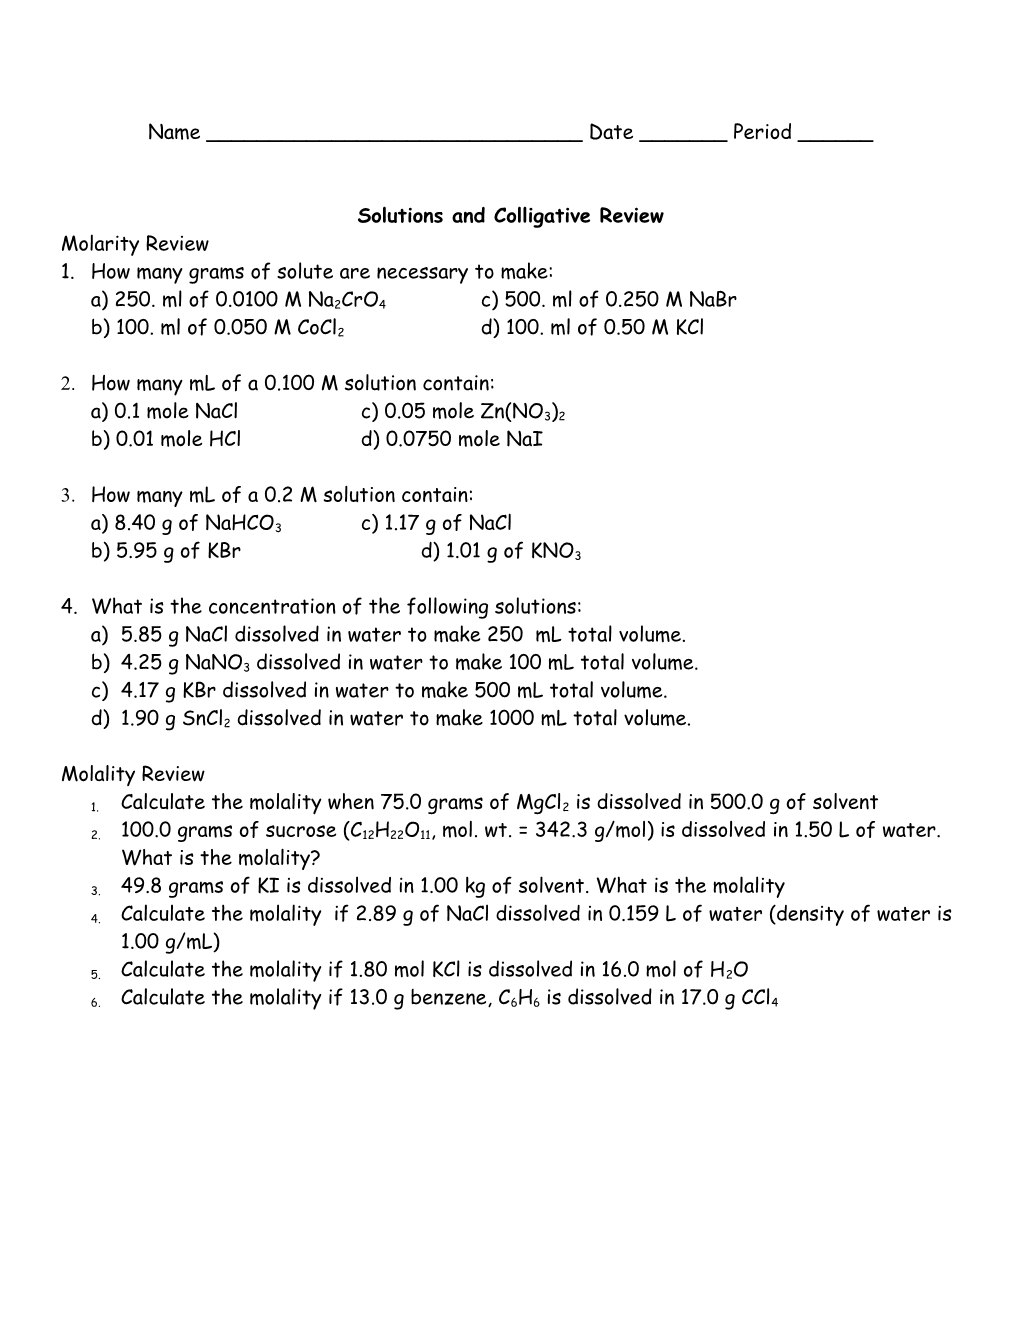 Solutions and Colligative Review